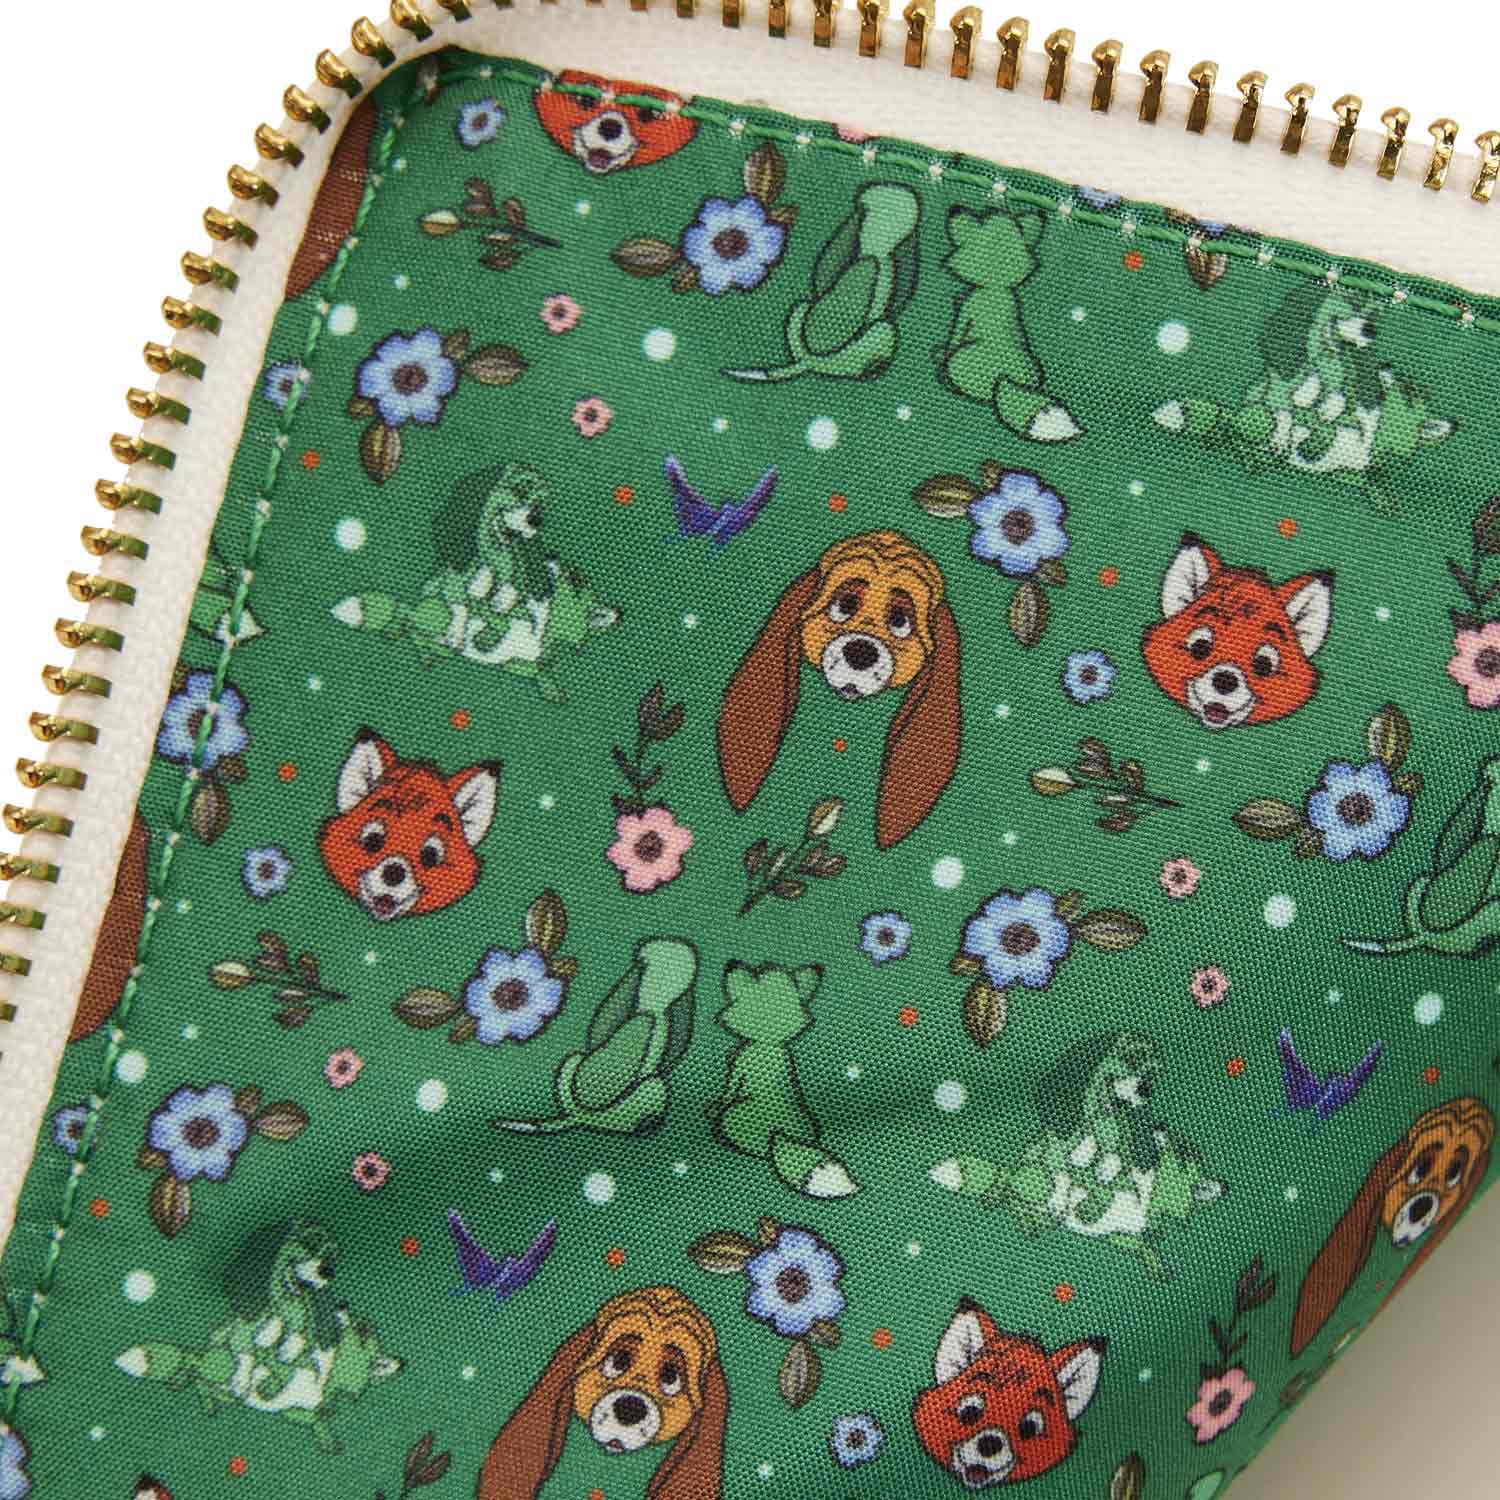 Loungefly x Disney Book Series The Fox and The Hound Convertible Crossbody Bag